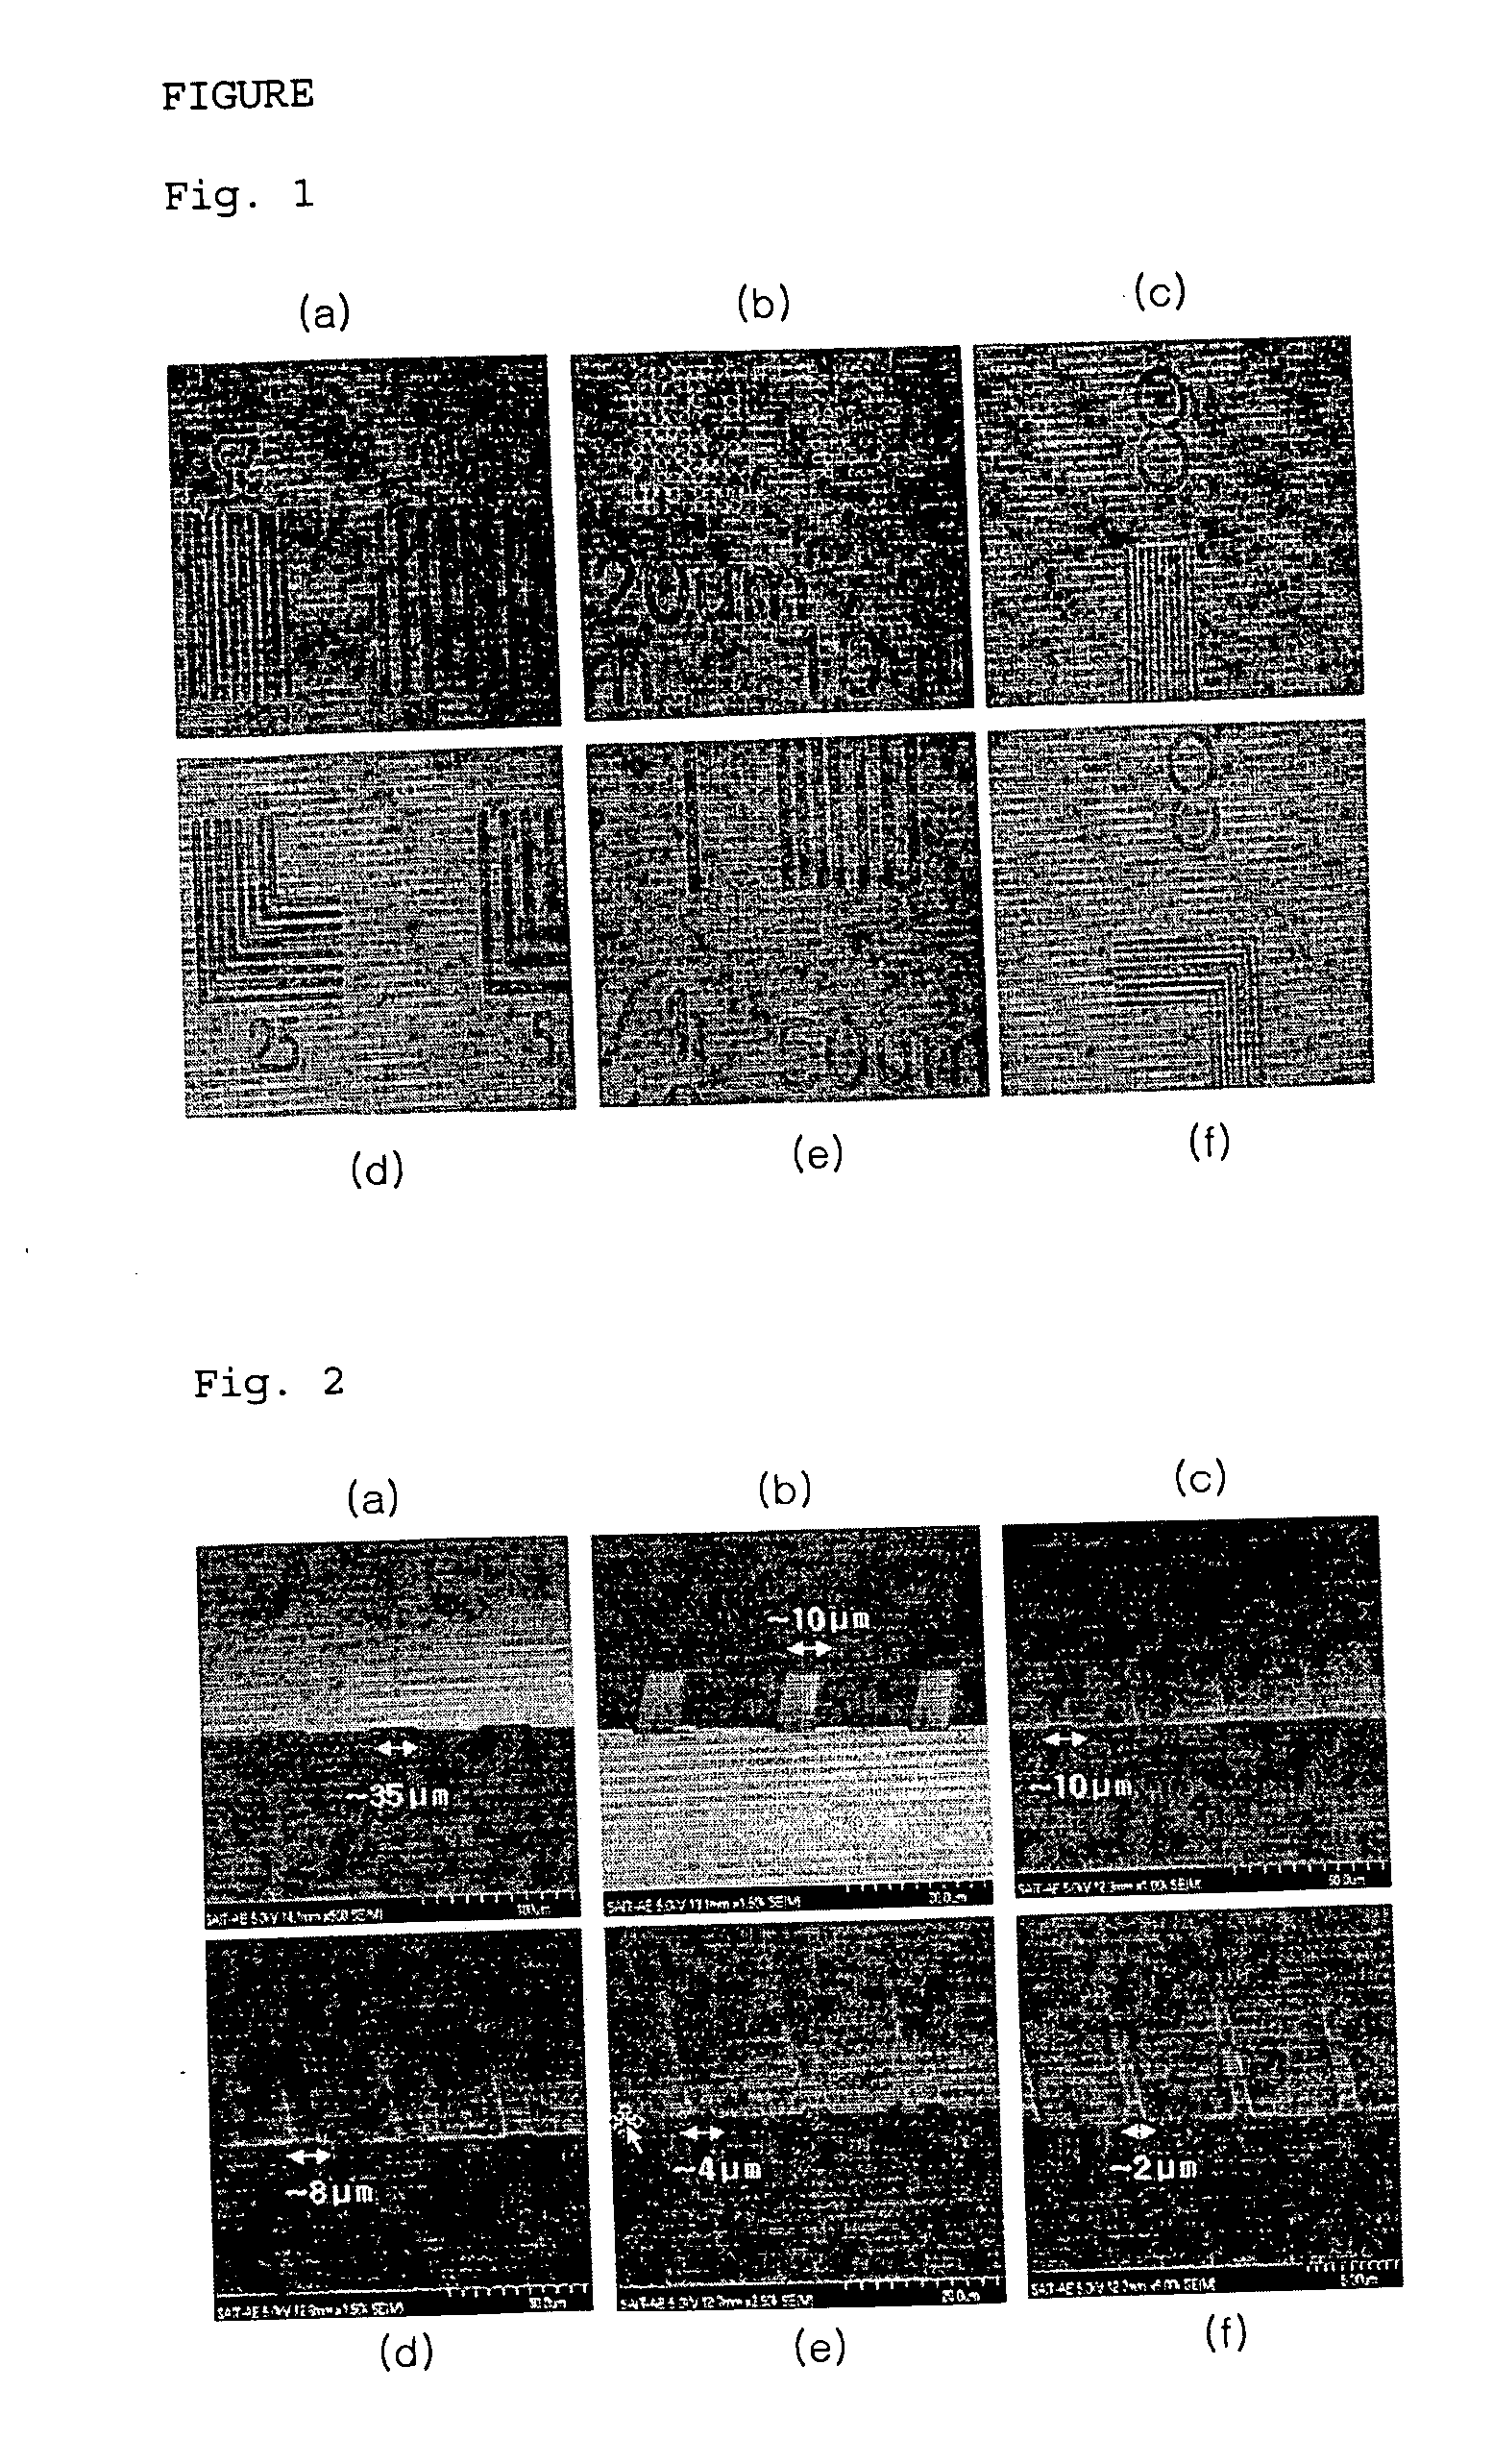 Composition for forming dielectric film and method for forming dielectric film or pattern using the composition